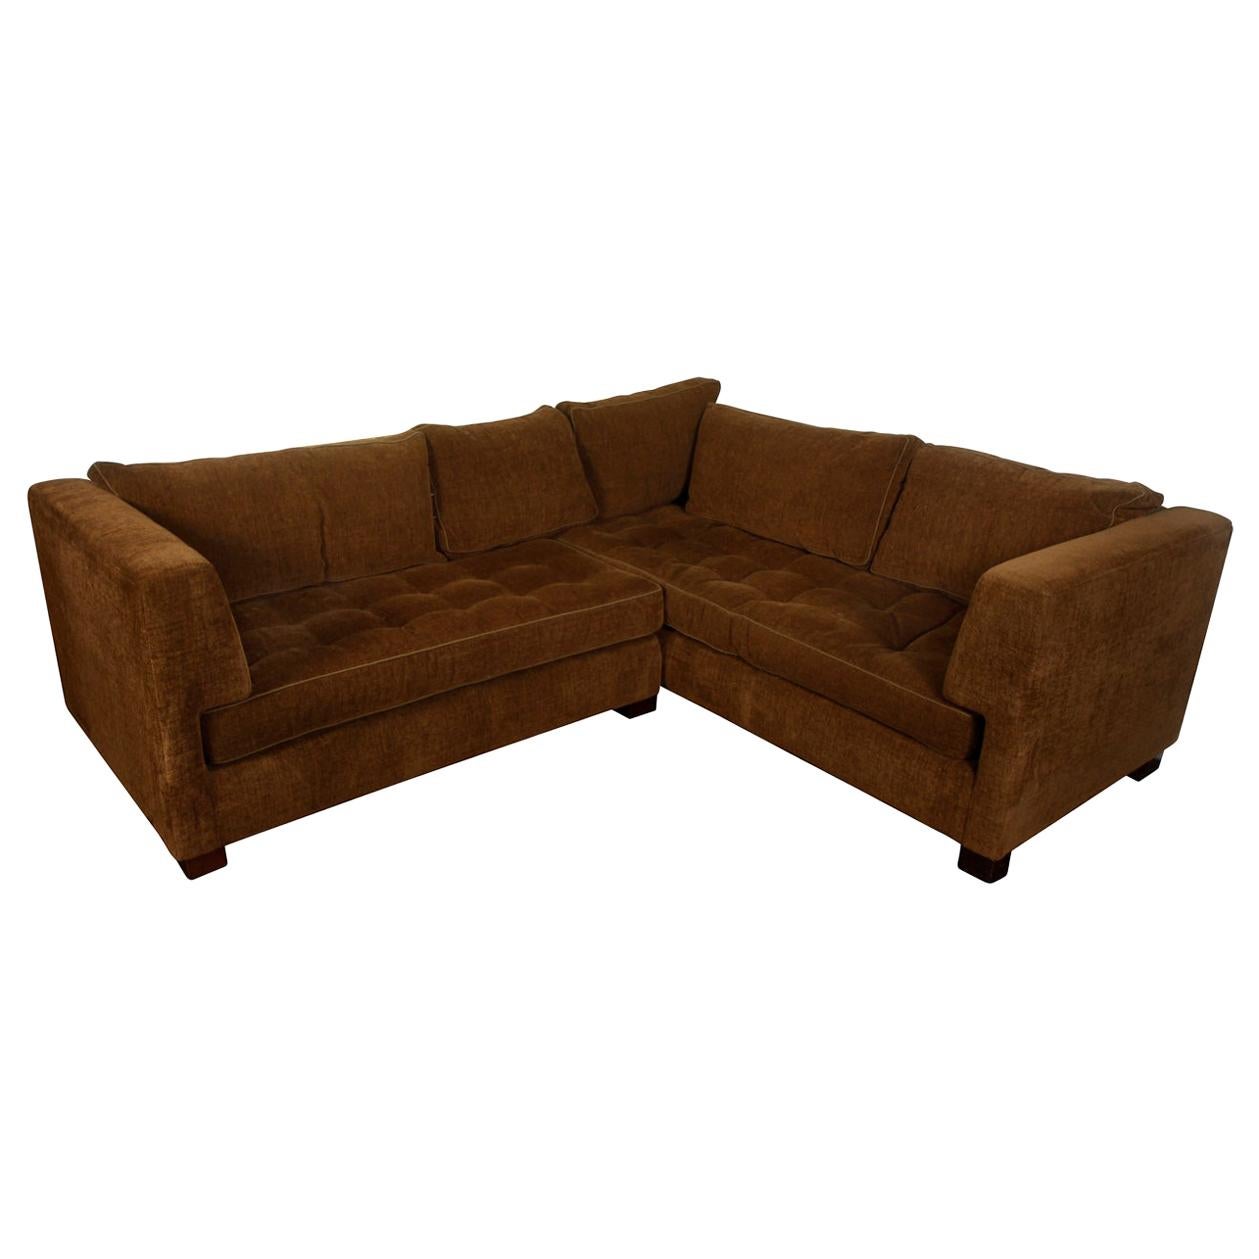 Chocolate Chenille Sectional Sofa For Sale